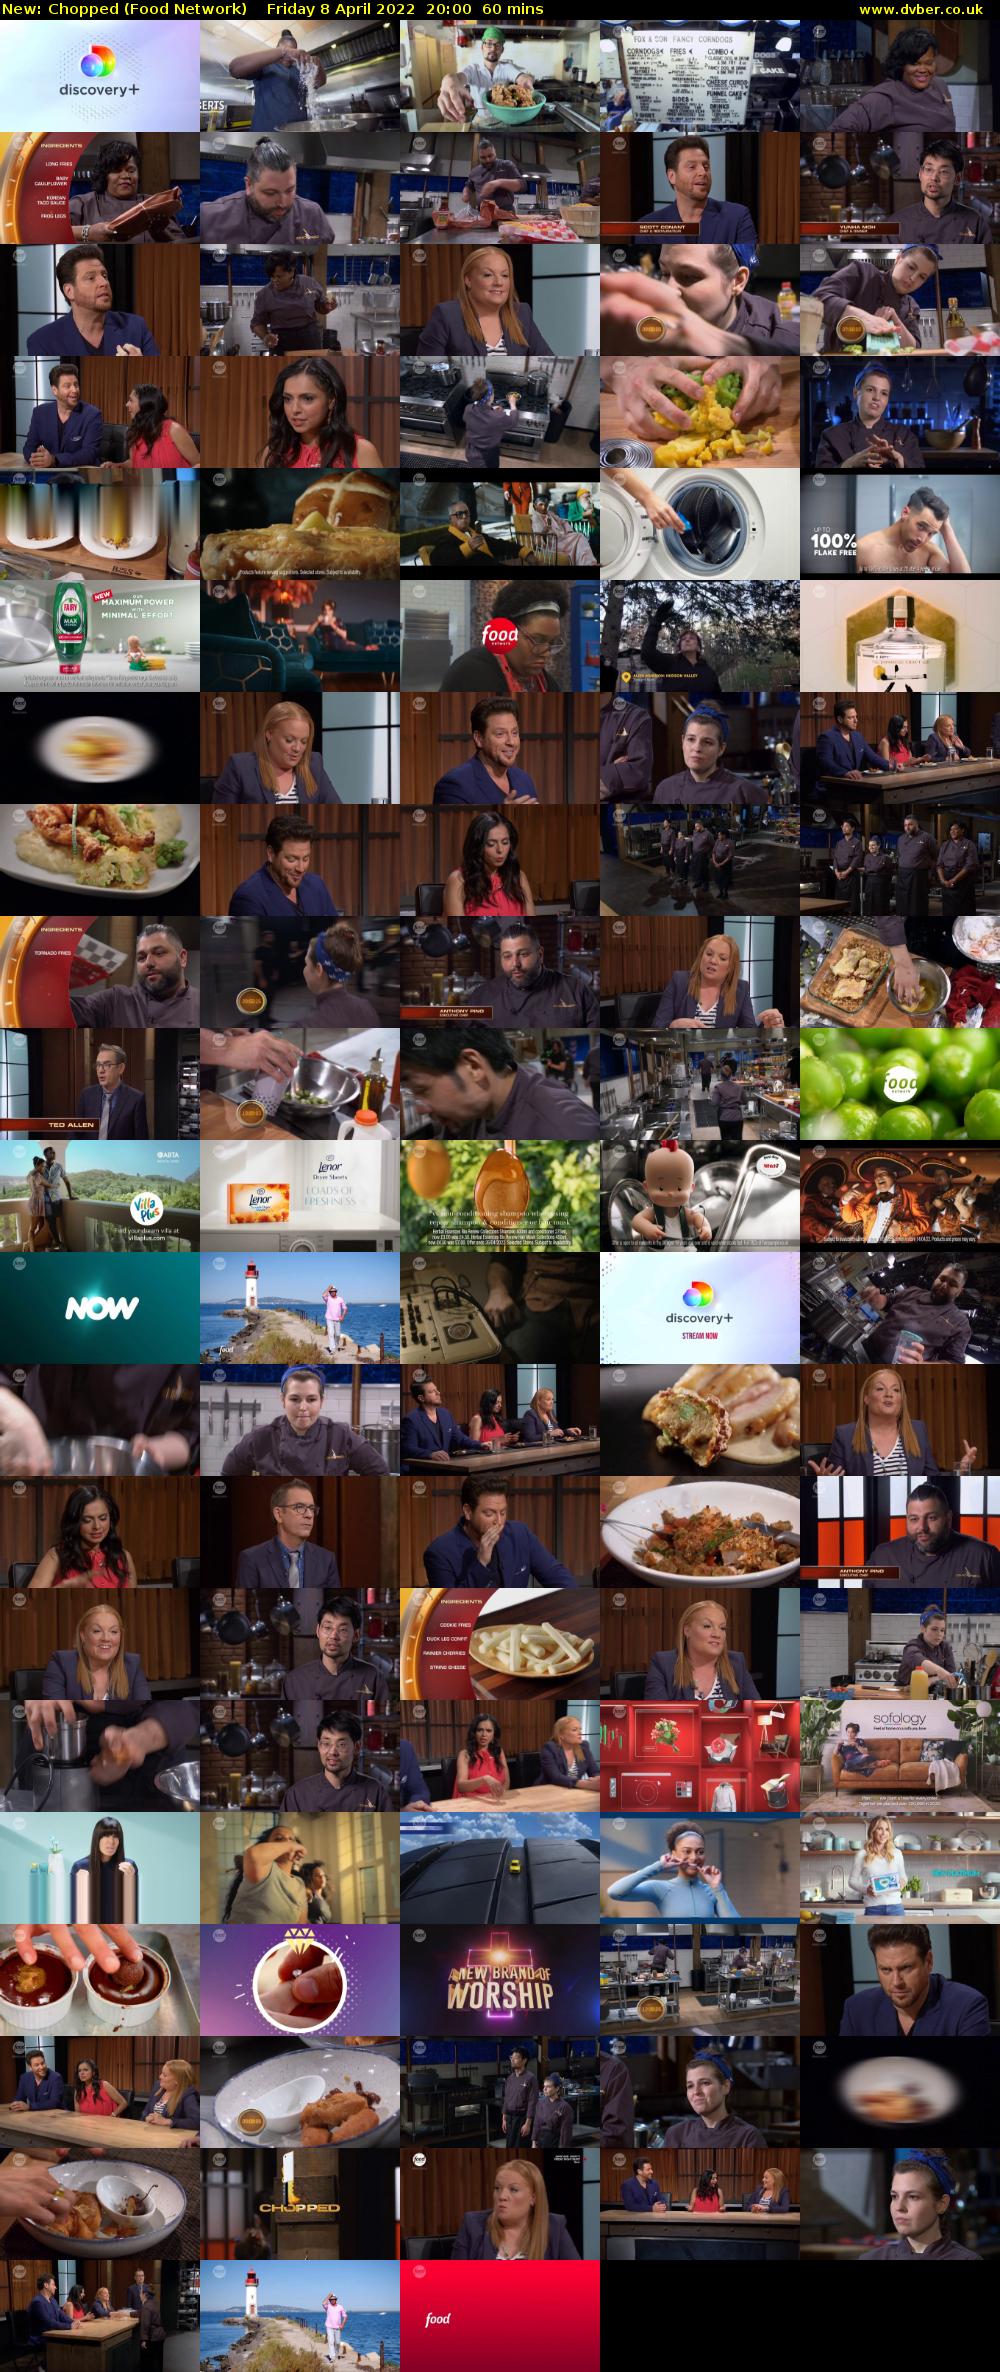 Chopped (Food Network) Friday 8 April 2022 20:00 - 21:00